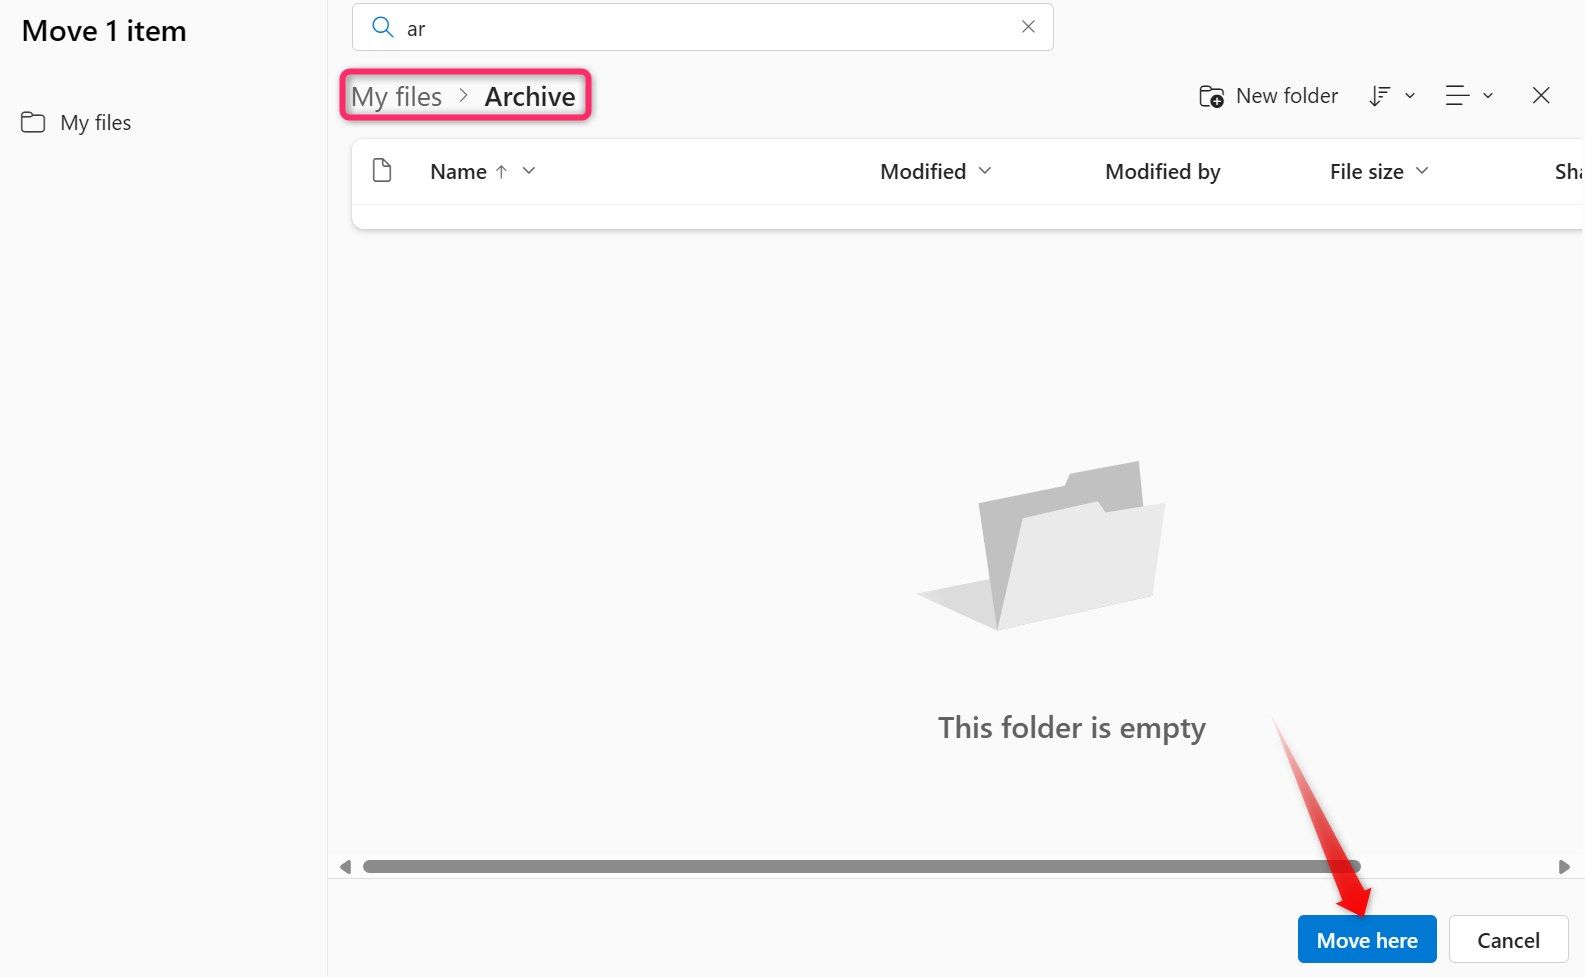 Moving a folder to an archive folder in OneDrive.